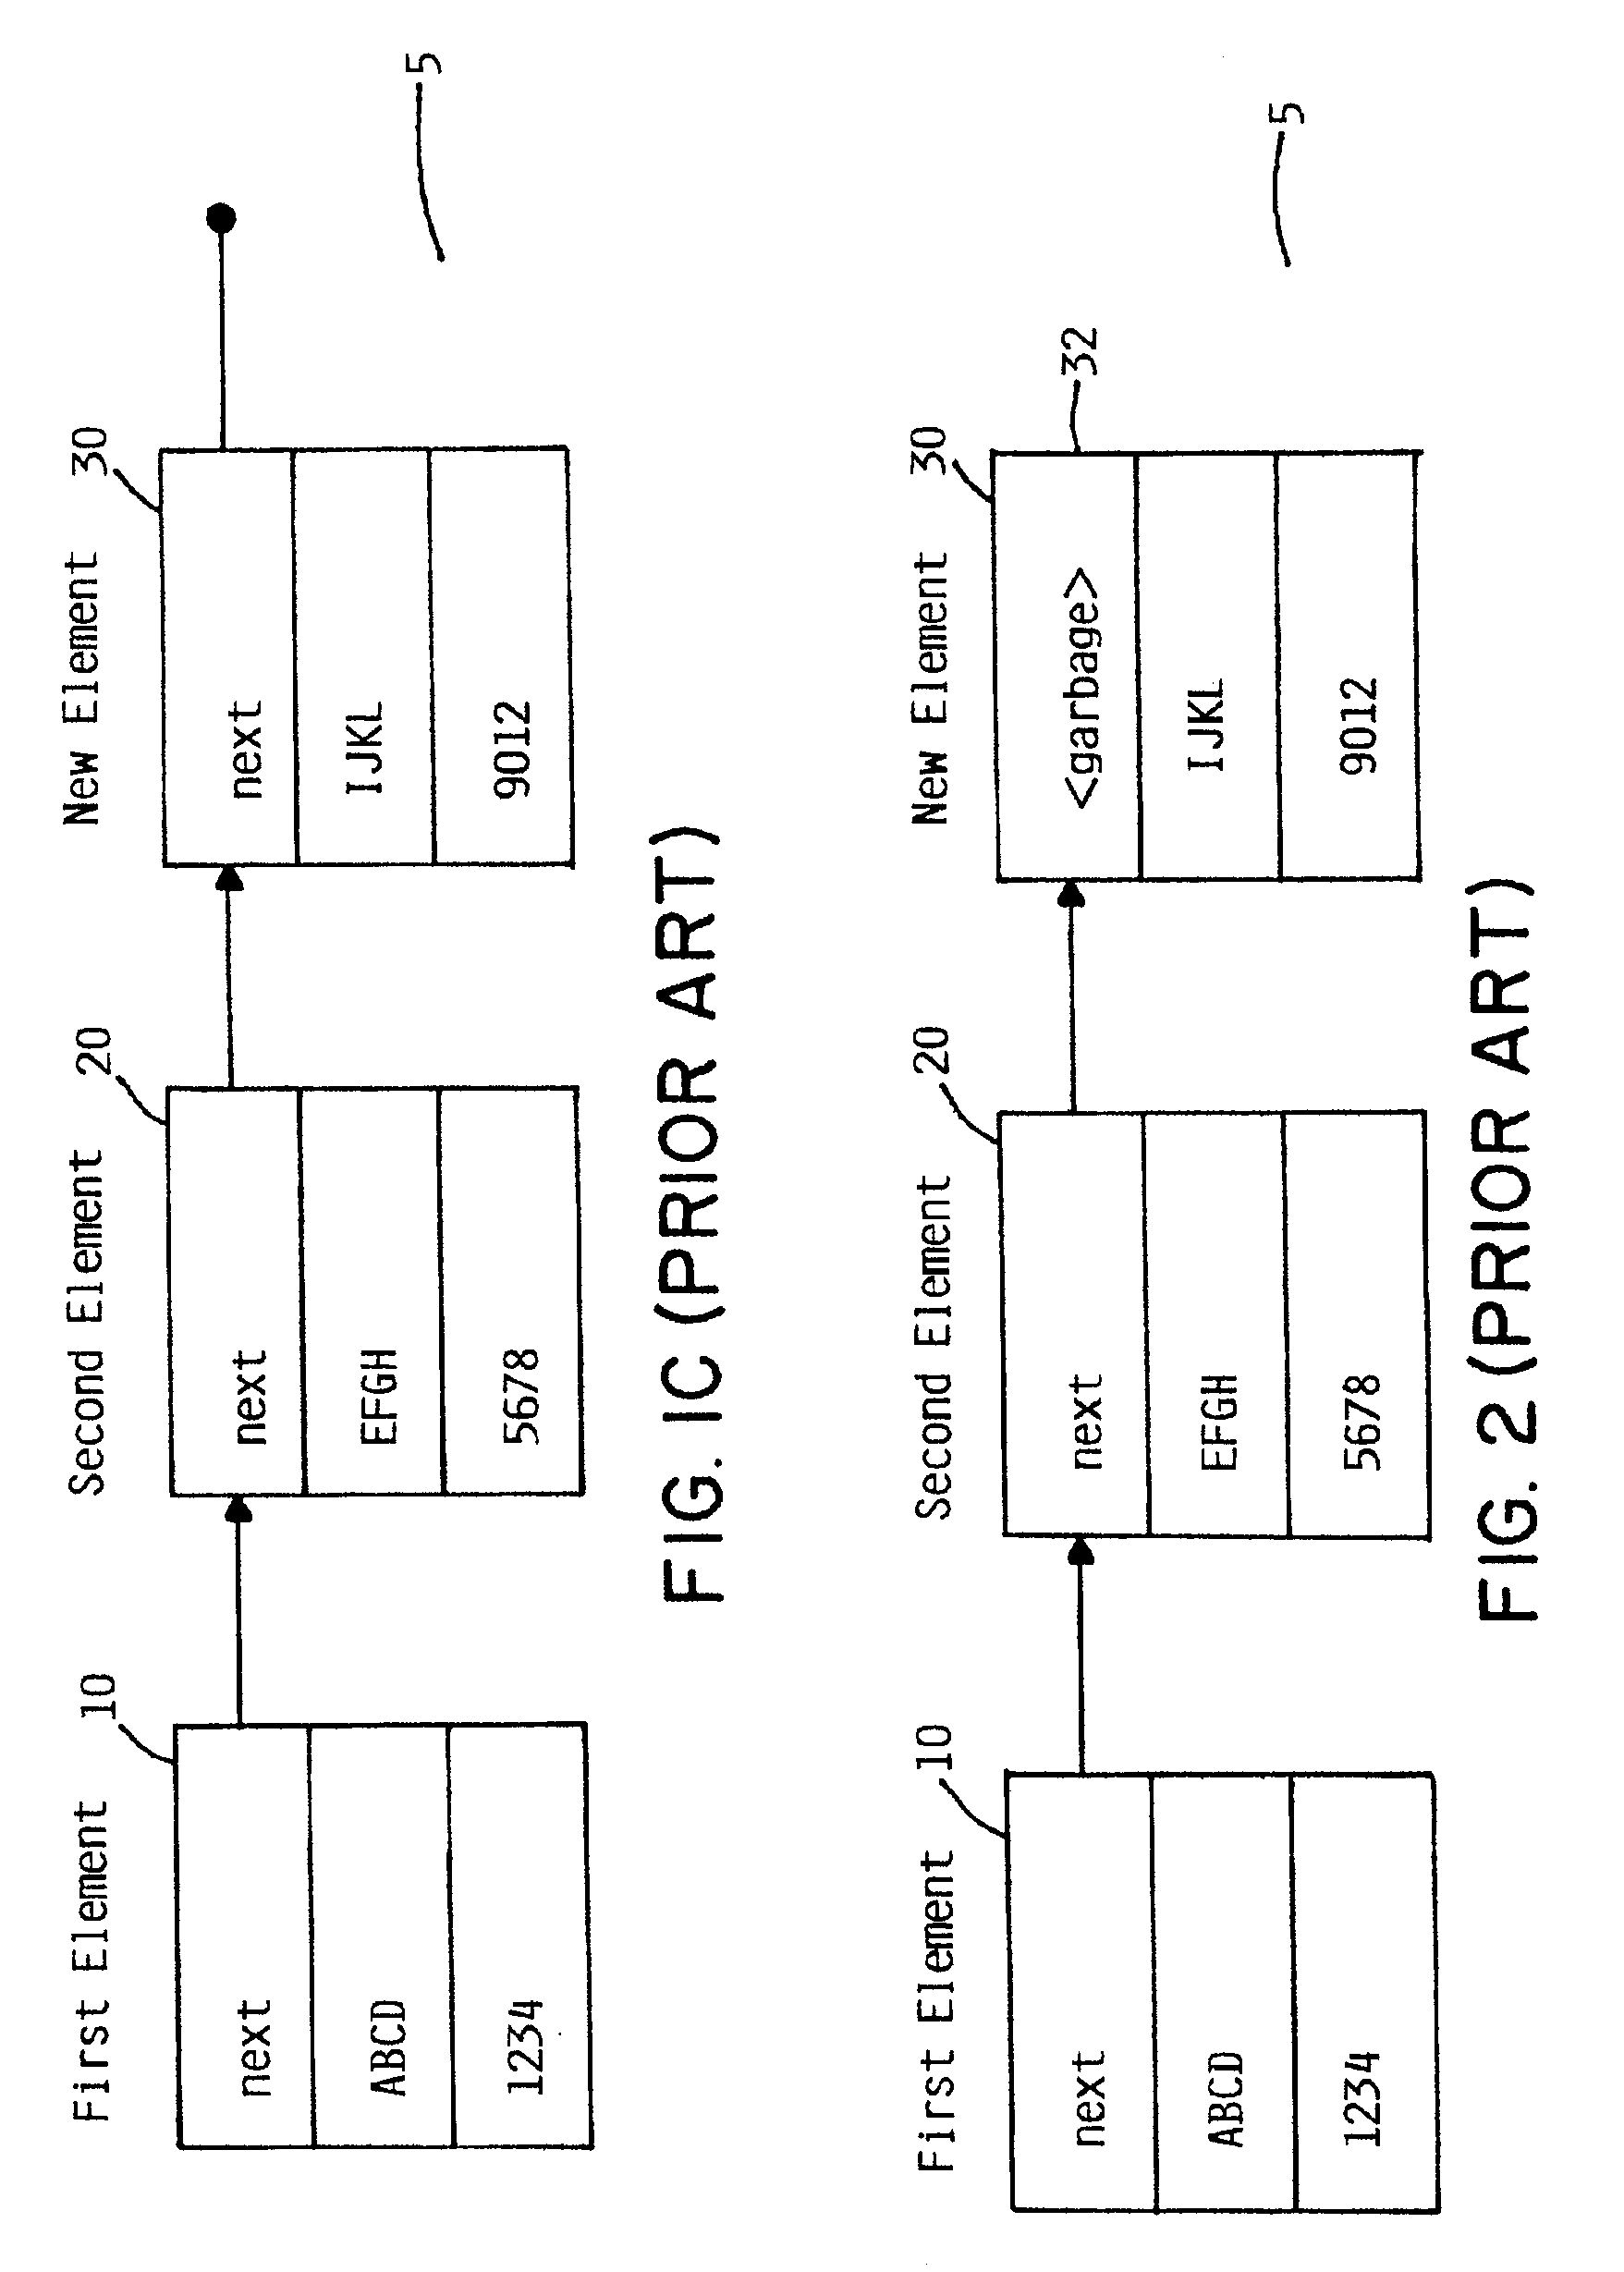 Software implementation of synchronous memory barriers